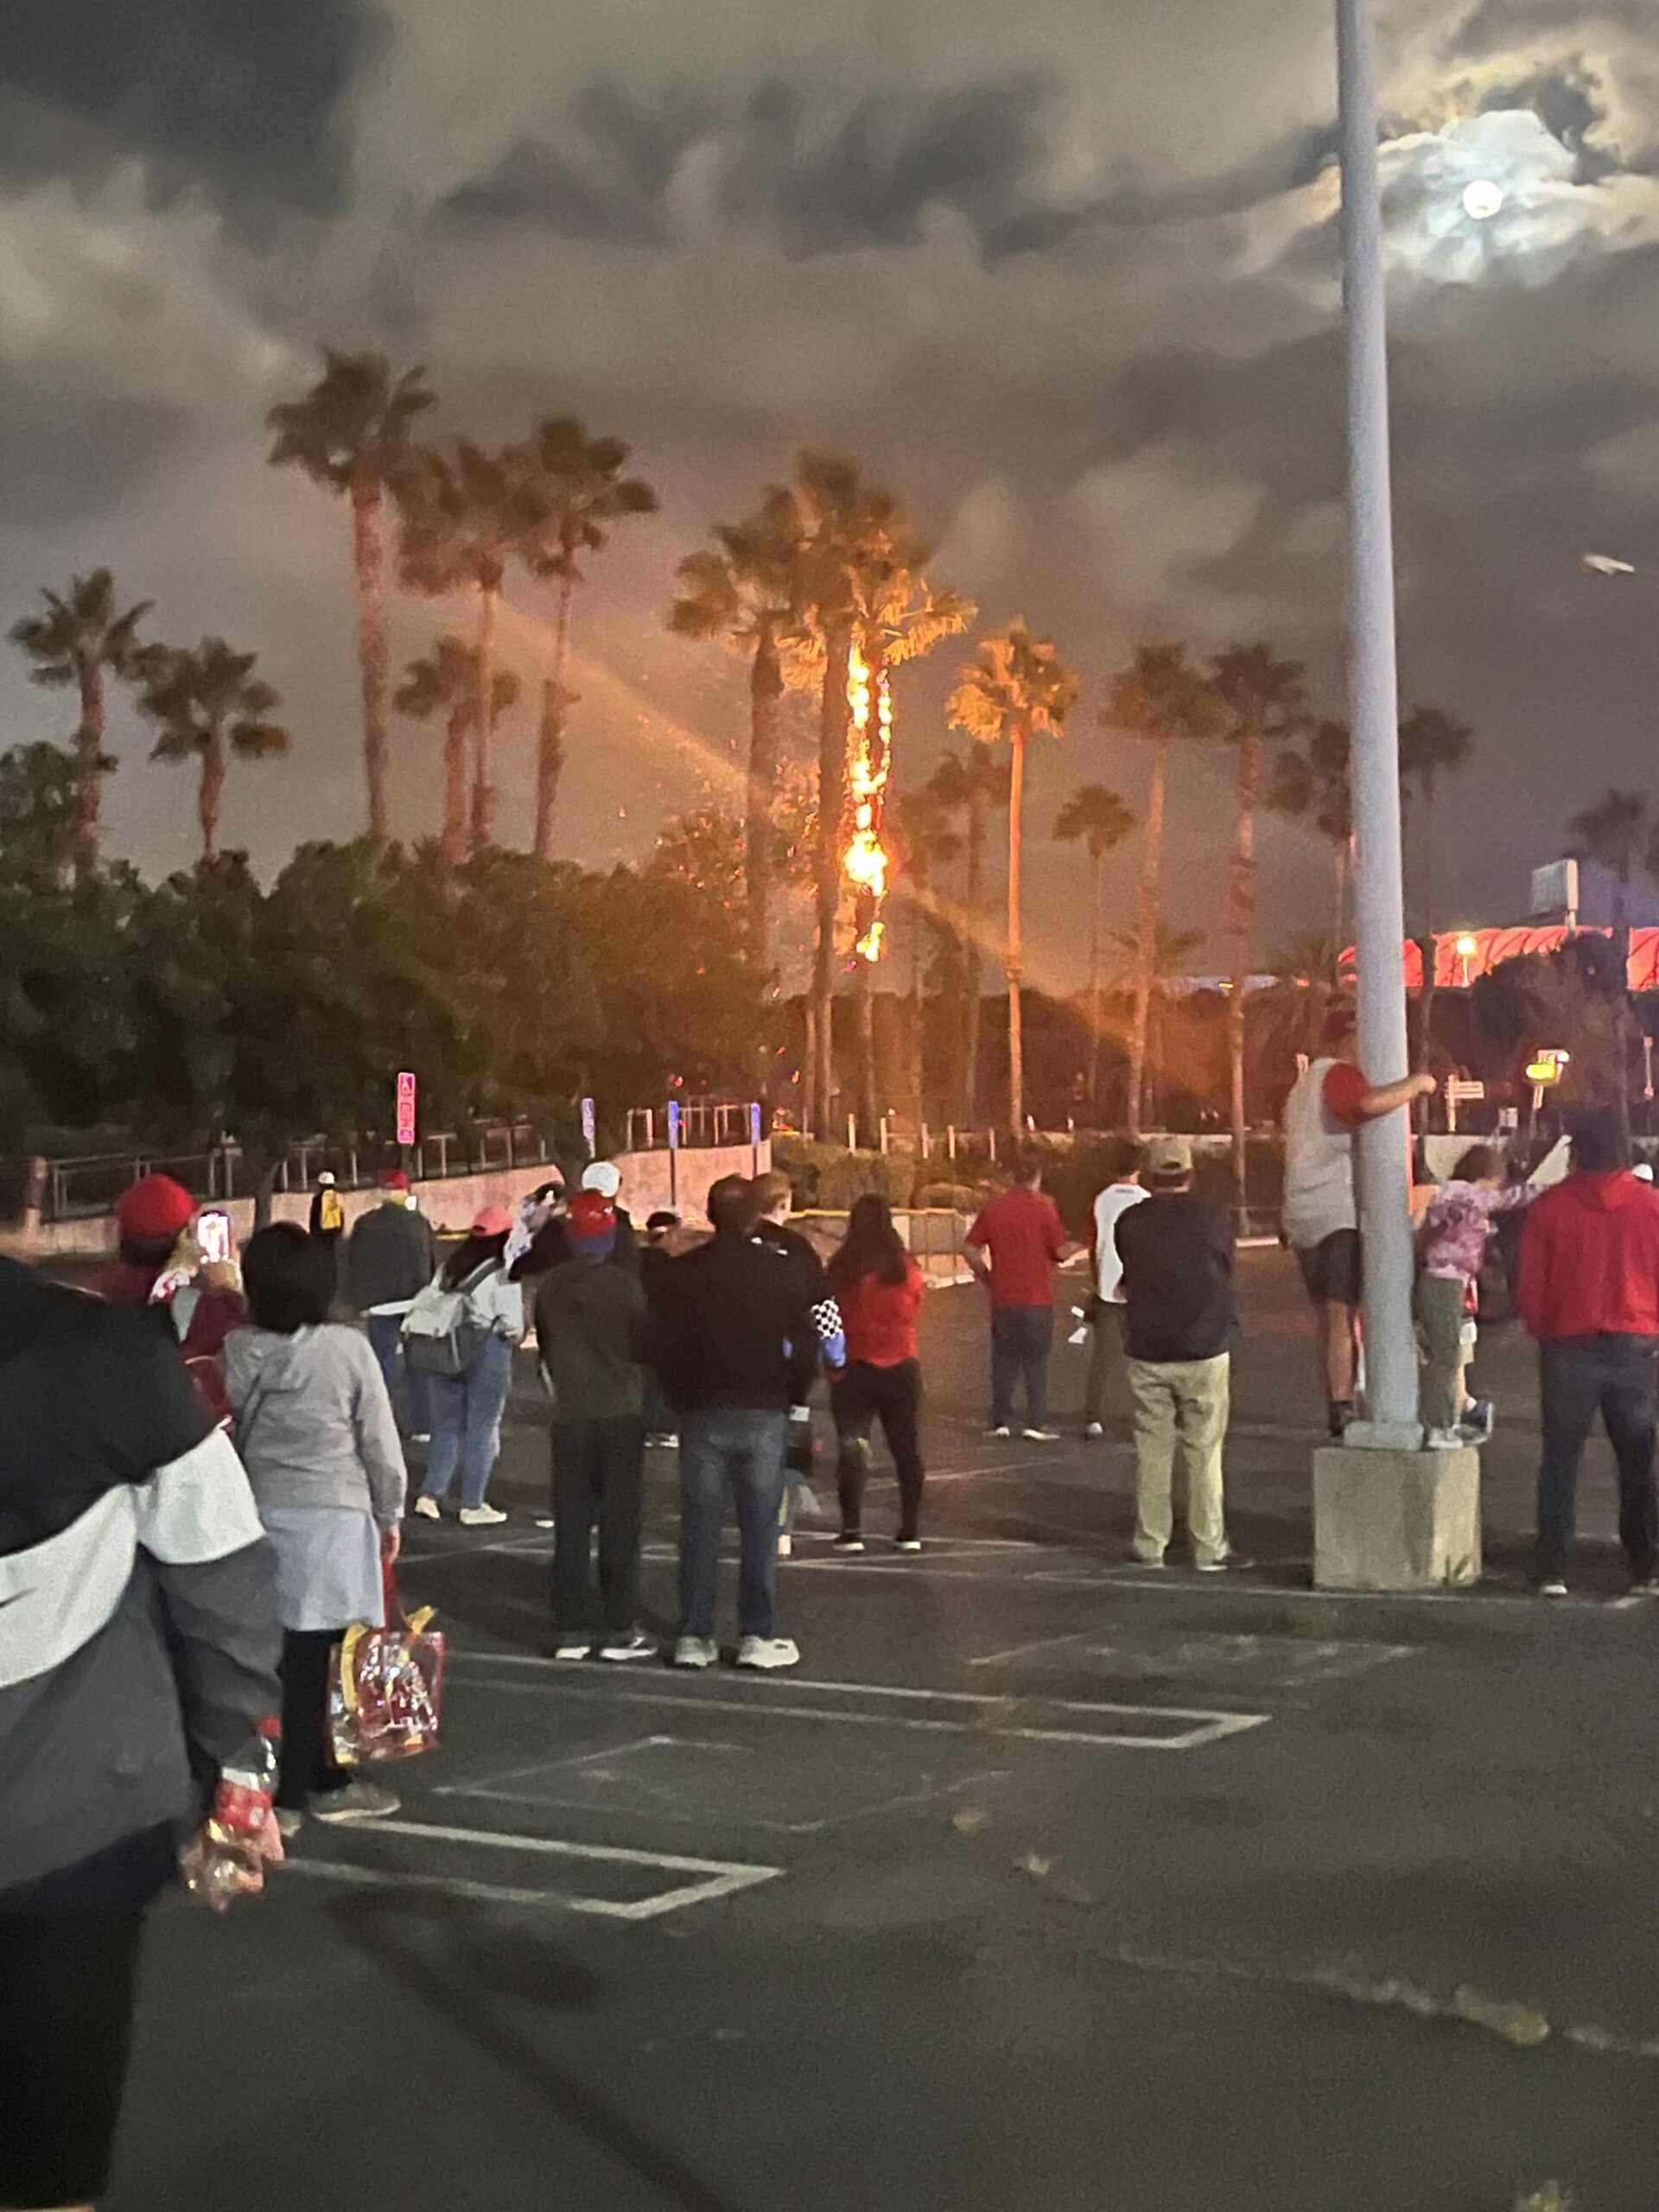 In true Angels baseball fashion, the Saturday night fireworks ended with a tree on fire